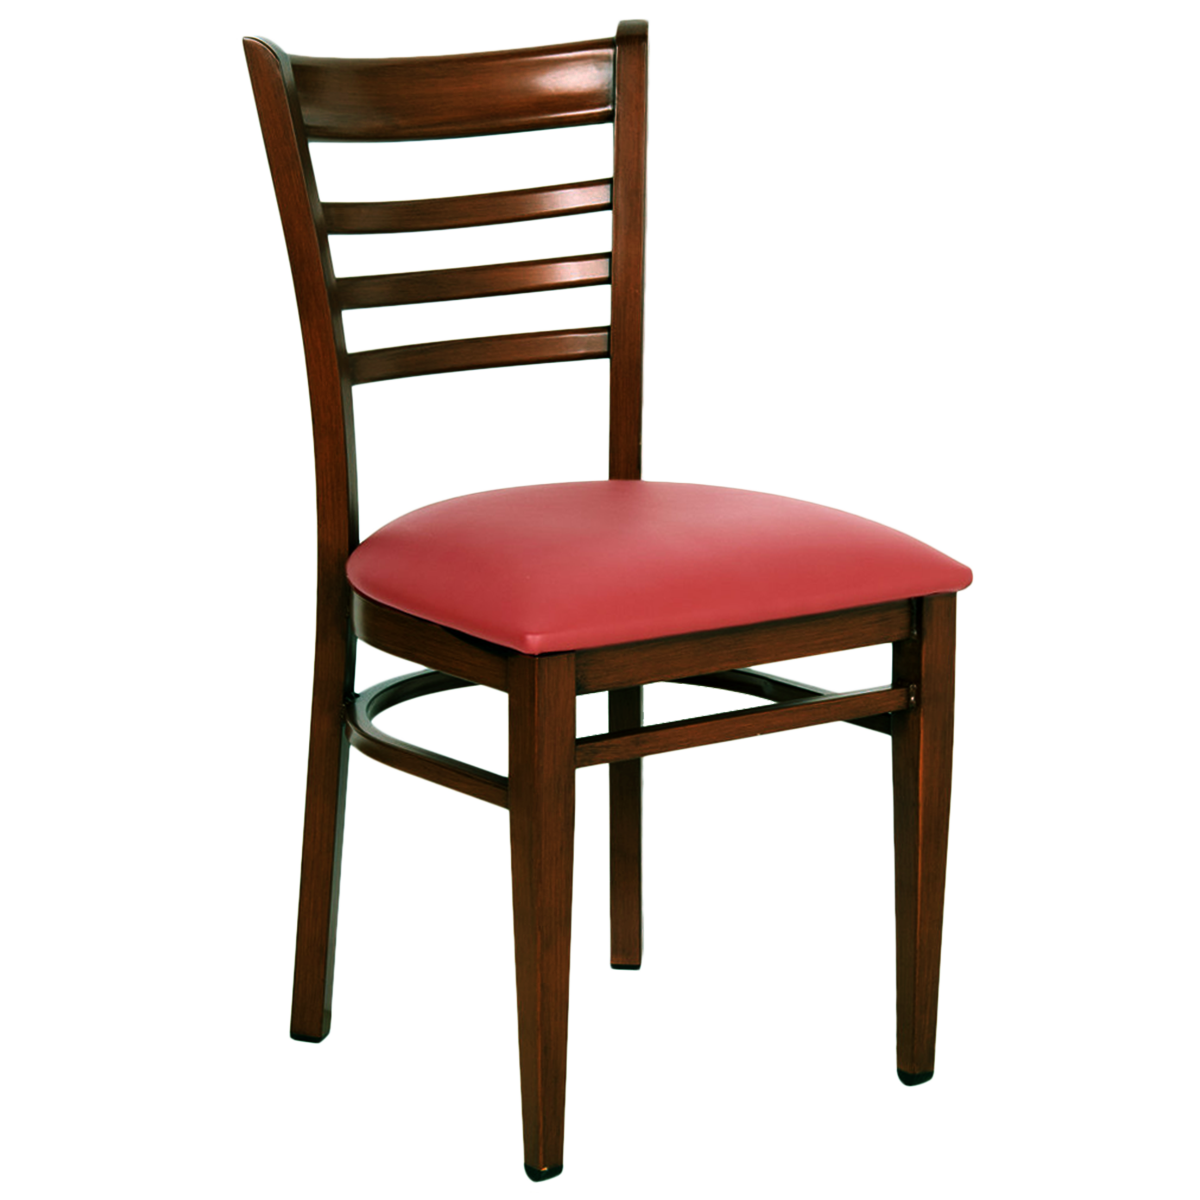 Ladder-Back Chair Picture Free Photo PNG PNG Image